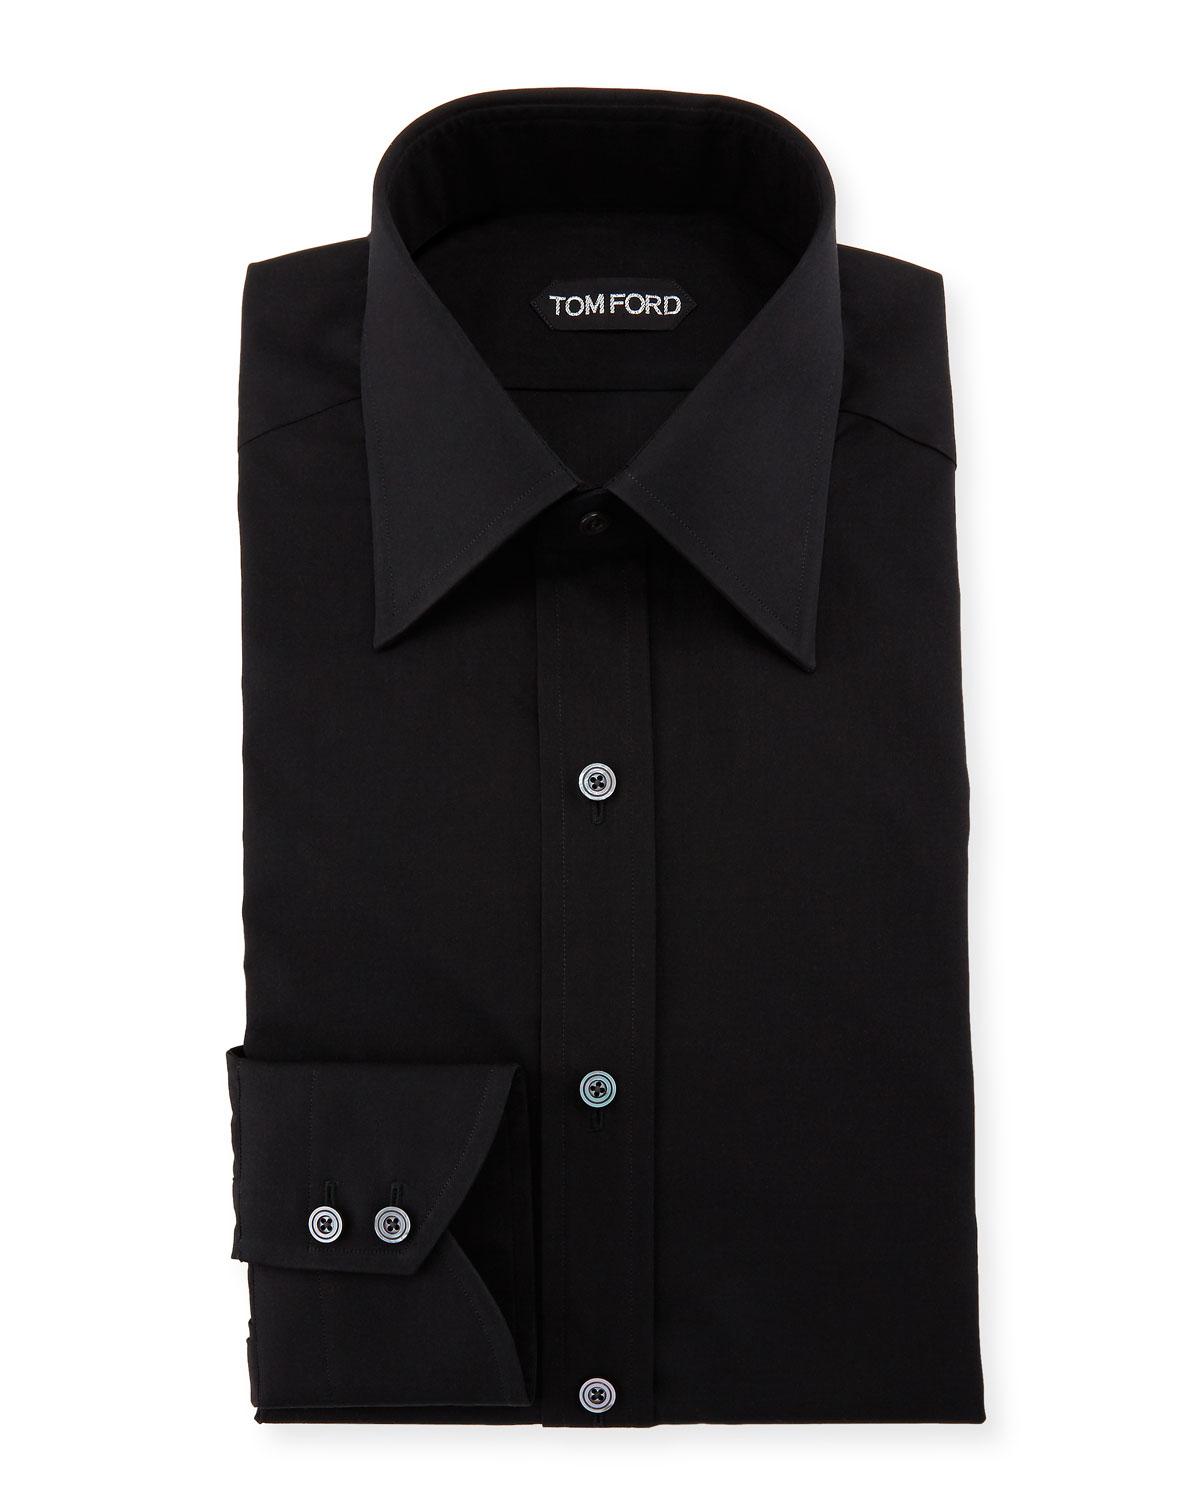 Tom Ford Cotton Classic Barrel Cuff Dress Shirt in Black for Men - Save ...